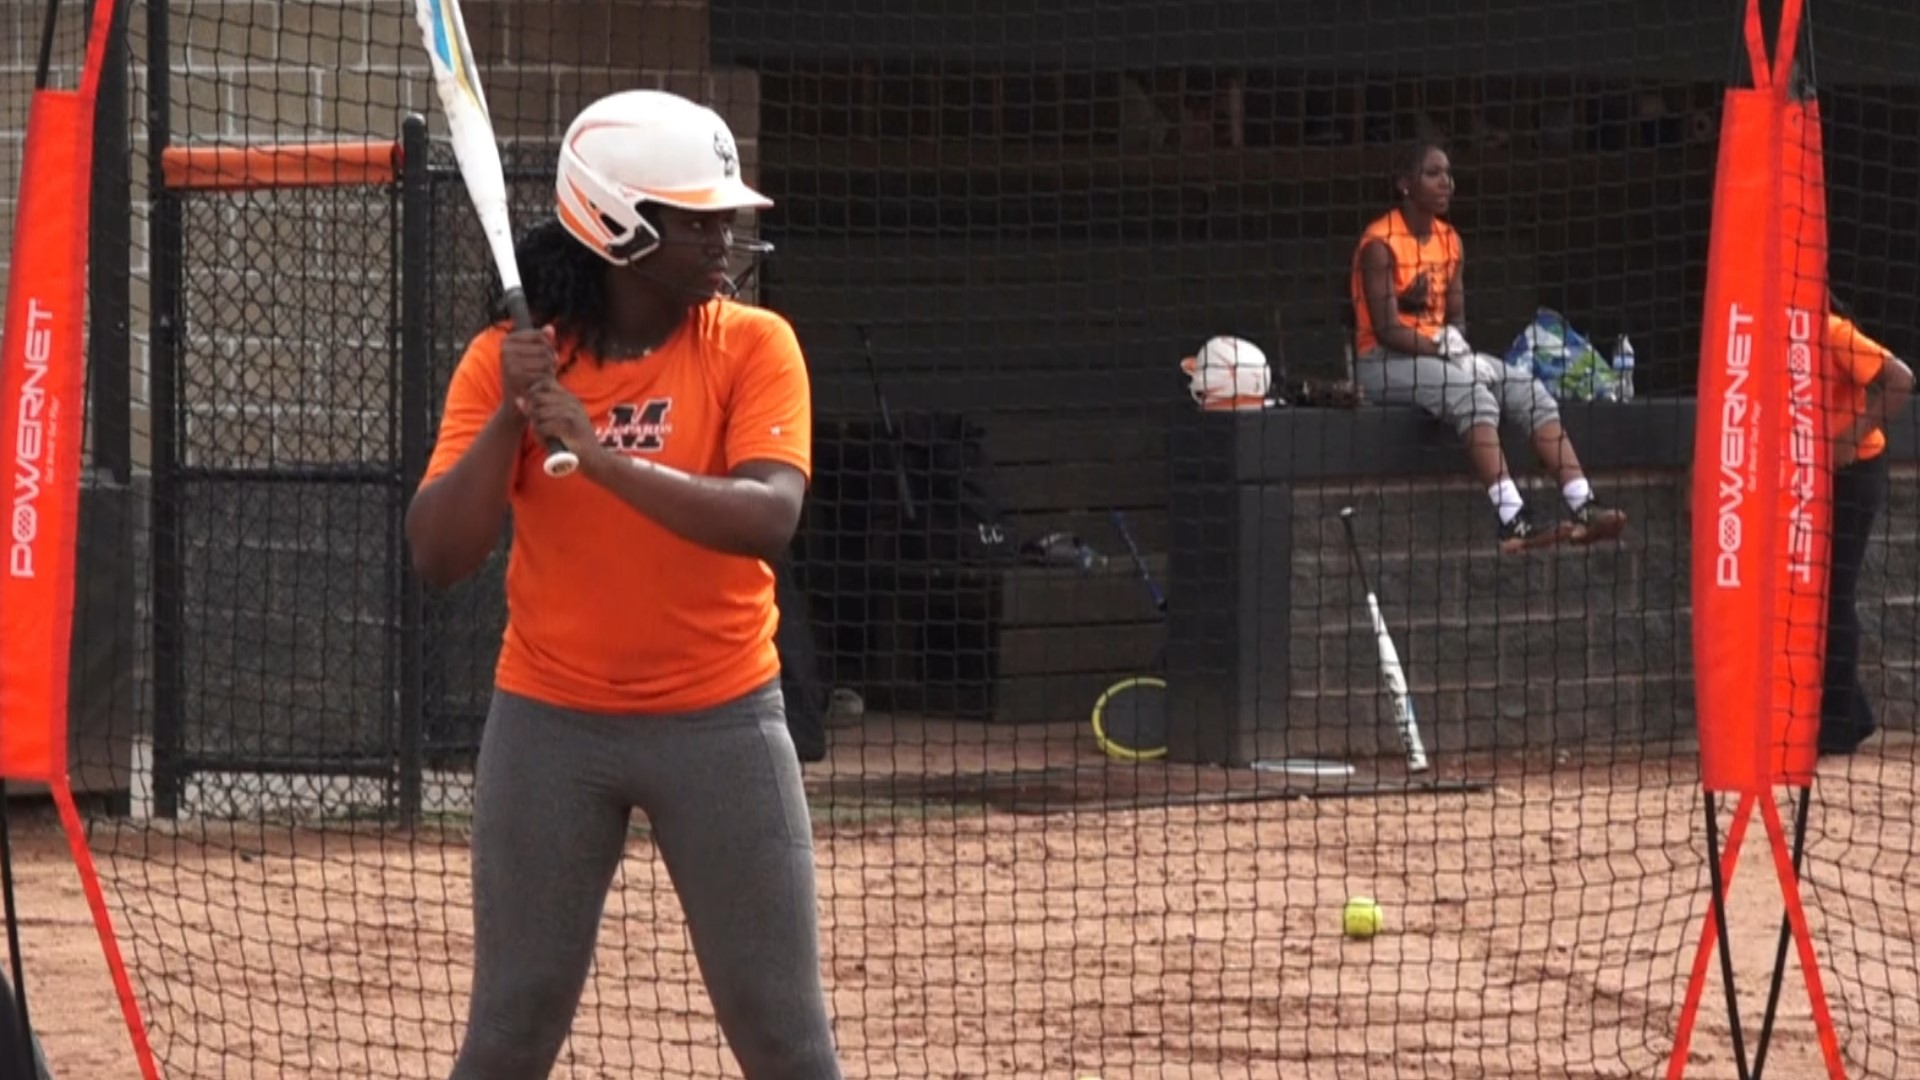 Kendall Watson wants to not only win a state championship this year, but eventually play big time college softball